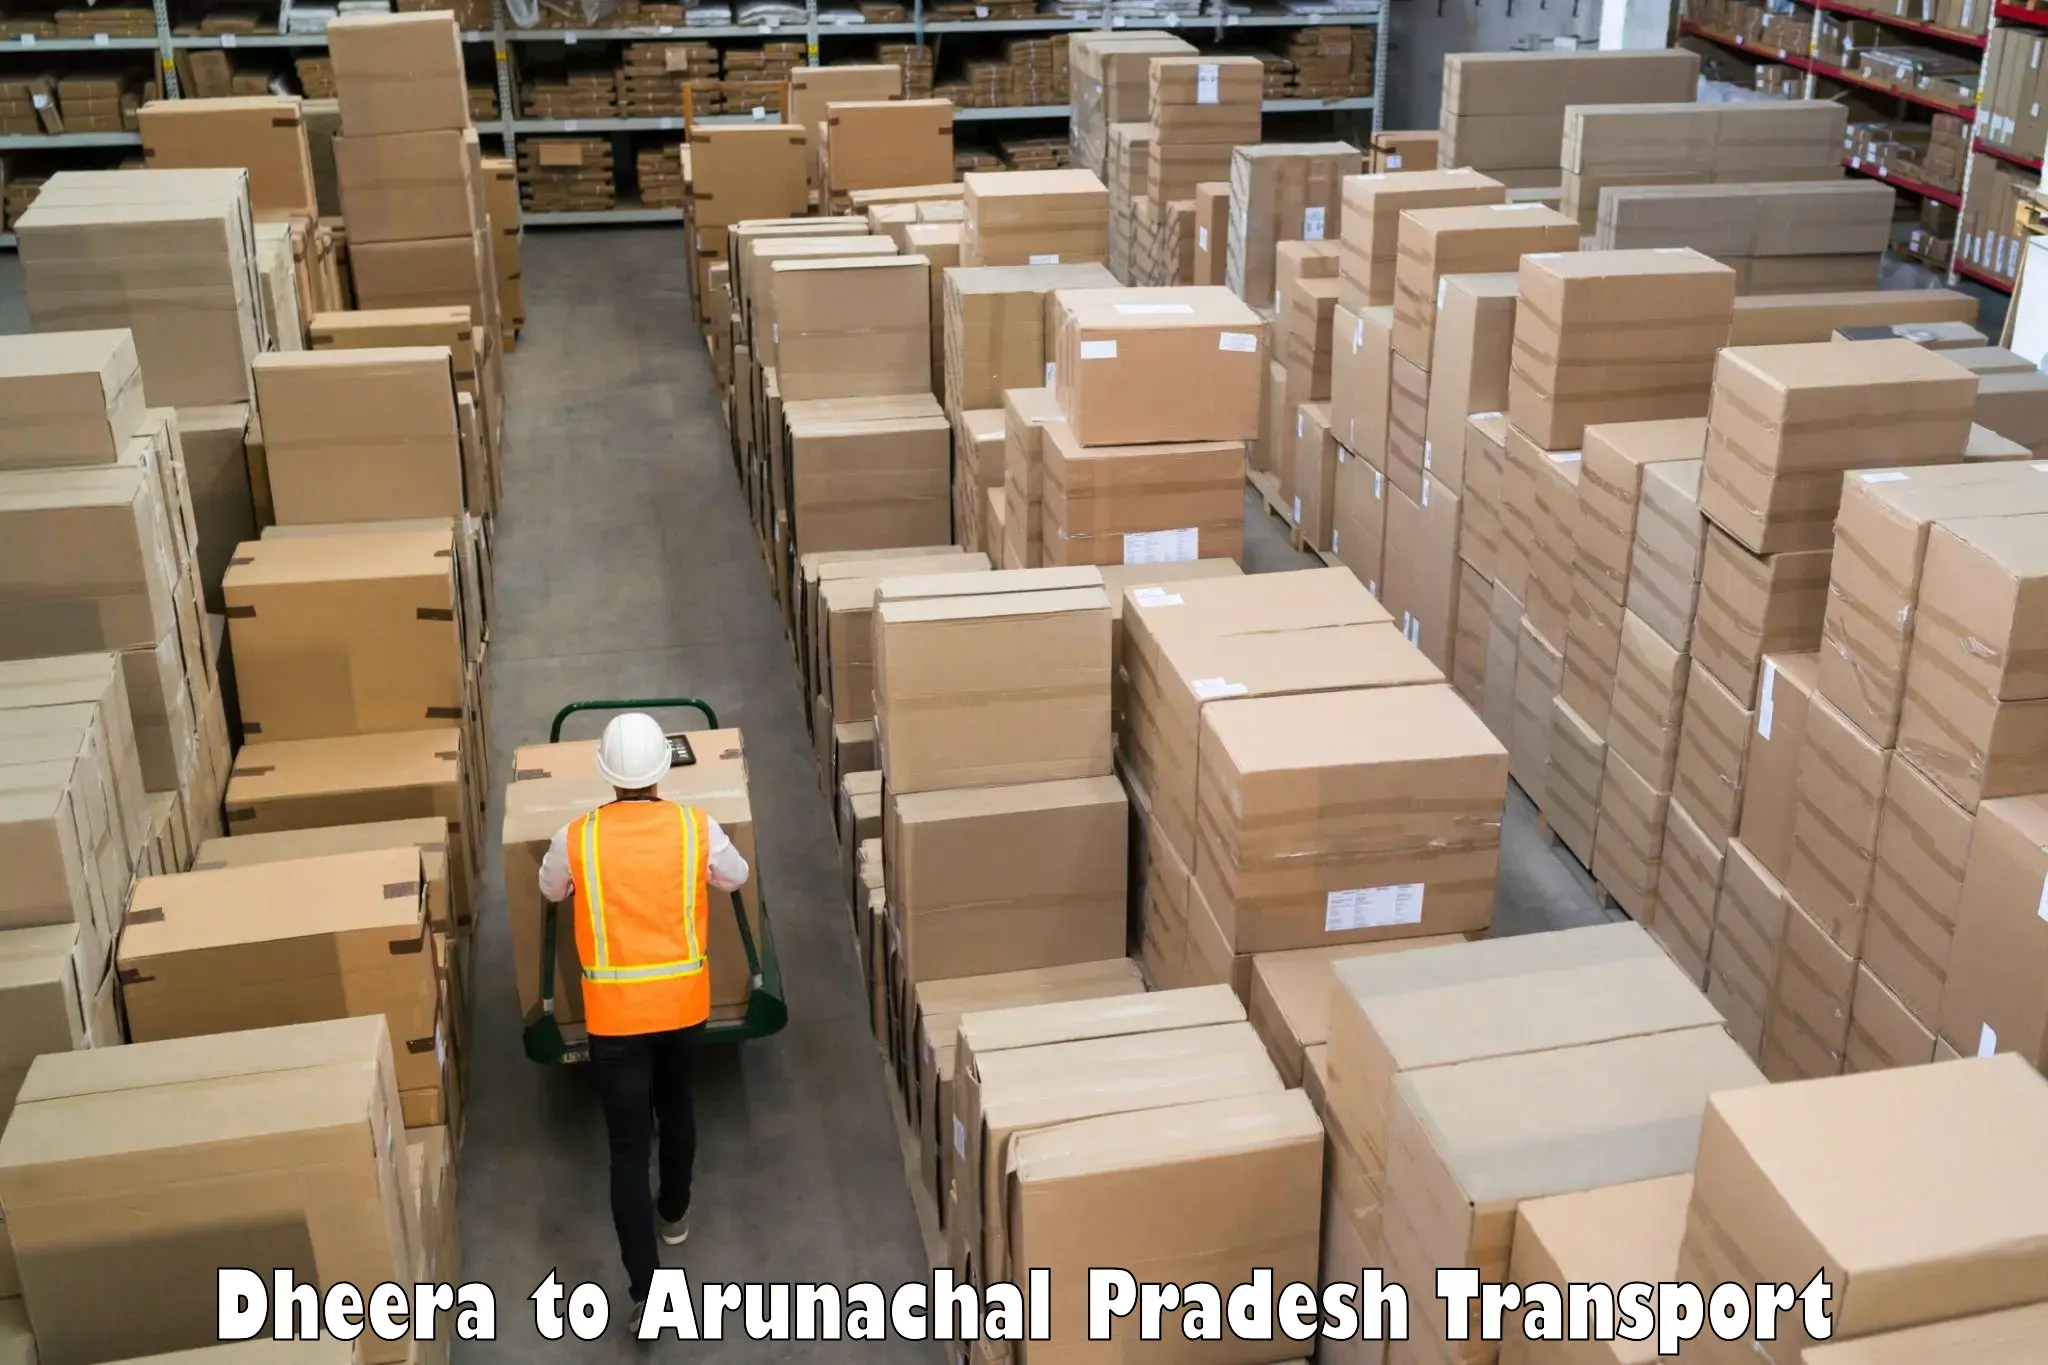 Daily parcel service transport in Dheera to Jairampur